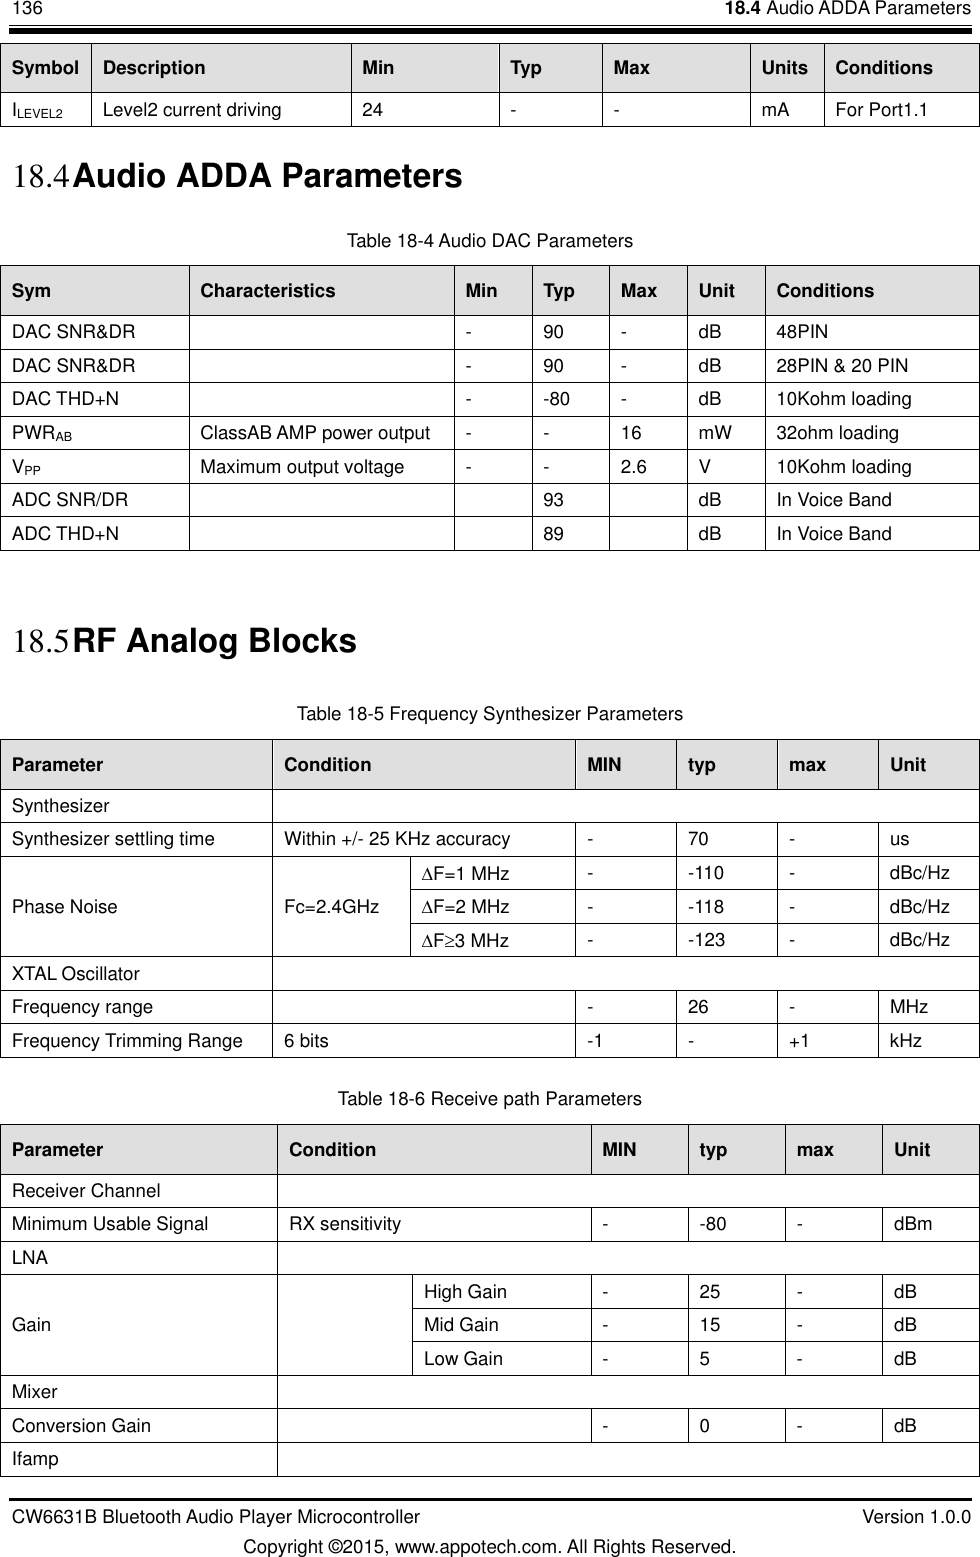 136    18.4 Audio ADDA Parameters CW6631B Bluetooth Audio Player Microcontroller    Version 1.0.0 Copyright ©2015, www.appotech.com. All Rights Reserved.   Symbol  Description  Min  Typ  Max  Units  Conditions ILEVEL2  Level2 current driving  24  -  -  mA  For Port1.1 18.4 Audio ADDA Parameters Table 18-4 Audio DAC Parameters   Sym  Characteristics  Min  Typ  Max  Unit  Conditions DAC SNR&amp;DR    -  90  -  dB  48PIN DAC SNR&amp;DR    -  90  -  dB  28PIN &amp; 20 PIN DAC THD+N    -  -80  -  dB  10Kohm loading PWRAB  ClassAB AMP power output  -  -  16 mW  32ohm loading VPP  Maximum output voltage  -  -  2.6  V  10Kohm loading ADC SNR/DR      93    dB  In Voice Band ADC THD+N      89    dB  In Voice Band  18.5 RF Analog Blocks Table 18-5 Frequency Synthesizer Parameters   Parameter  Condition  MIN  typ  max  Unit Synthesizer     Synthesizer settling time  Within +/- 25 KHz accuracy  -  70  -  us Phase Noise    Fc=2.4GHz F=1 MHz  -  -110  -  dBc/Hz F=2 MHz  -  -118  -  dBc/Hz F3 MHz    -  -123  -  dBc/Hz XTAL Oscillator     Frequency range    -  26  -  MHz Frequency Trimming Range    6 bits  -1  -  +1  kHz Table 18-6 Receive path Parameters   Parameter  Condition  MIN  typ  max  Unit Receiver Channel     Minimum Usable Signal  RX sensitivity  -  -80  -  dBm LNA     Gain     High Gain  -  25  -  dB Mid Gain  -  15  -  dB Low Gain  -  5  -  dB Mixer   Conversion Gain    -  0  -  dB Ifamp   